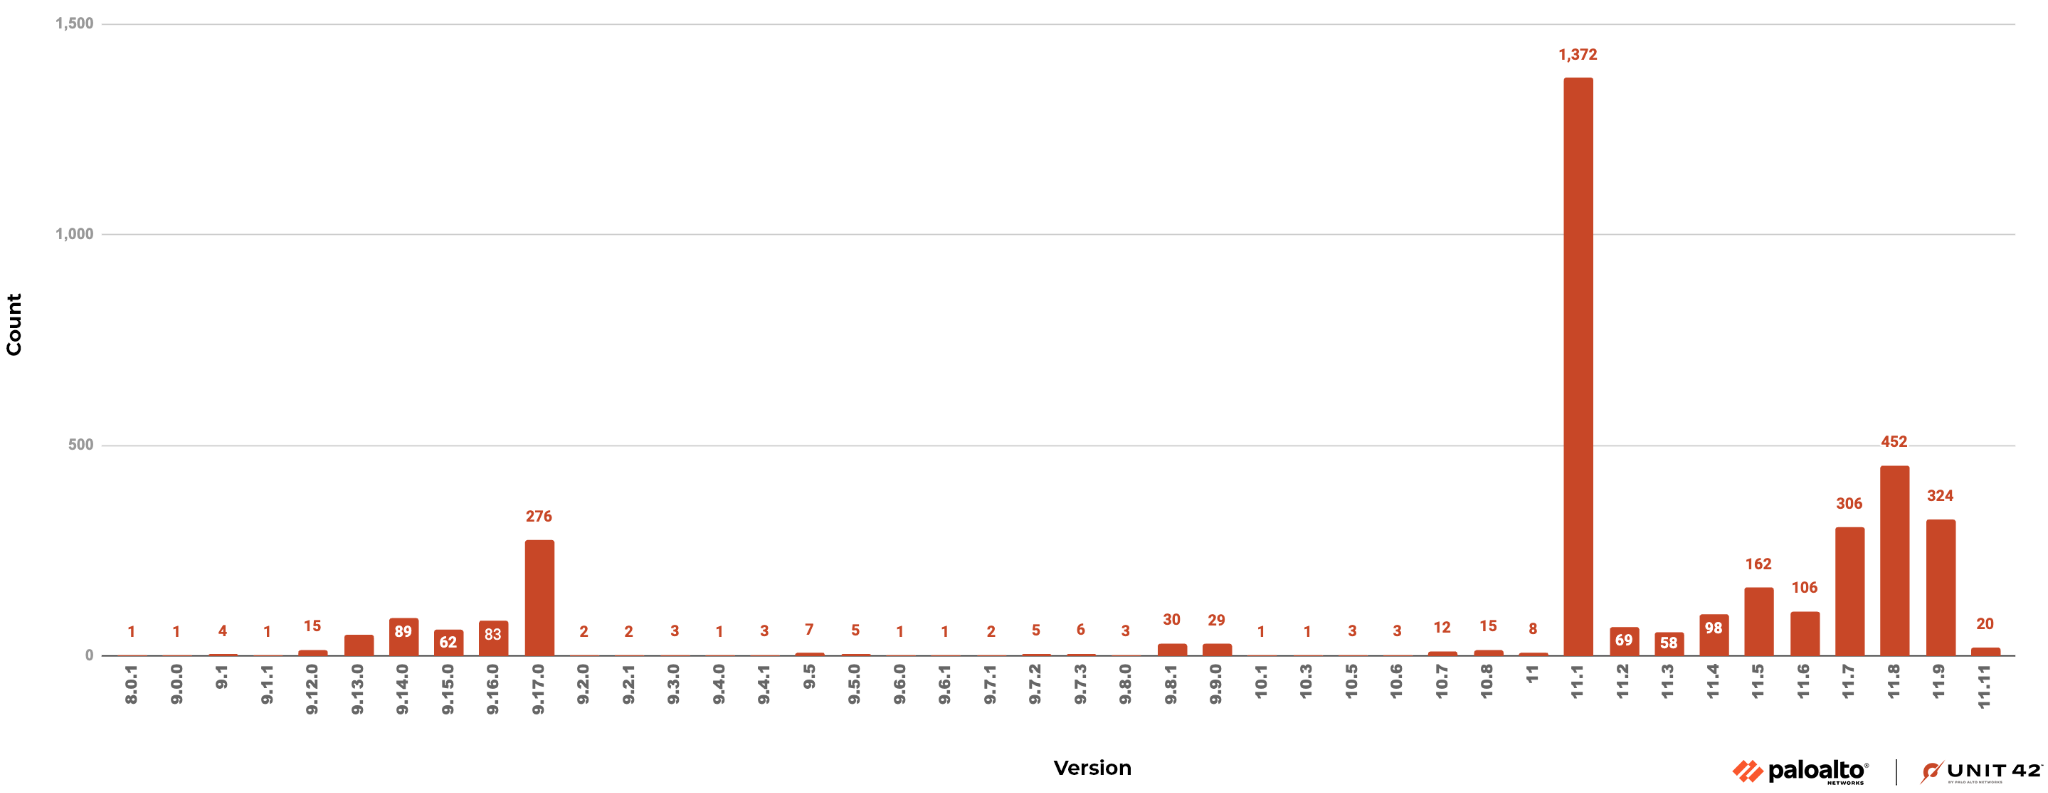 Image 1 is a column chart of the number of affected hosts captured by Unit 42 research where the version was known. The highest affected is version 11.1 with 1,372. 